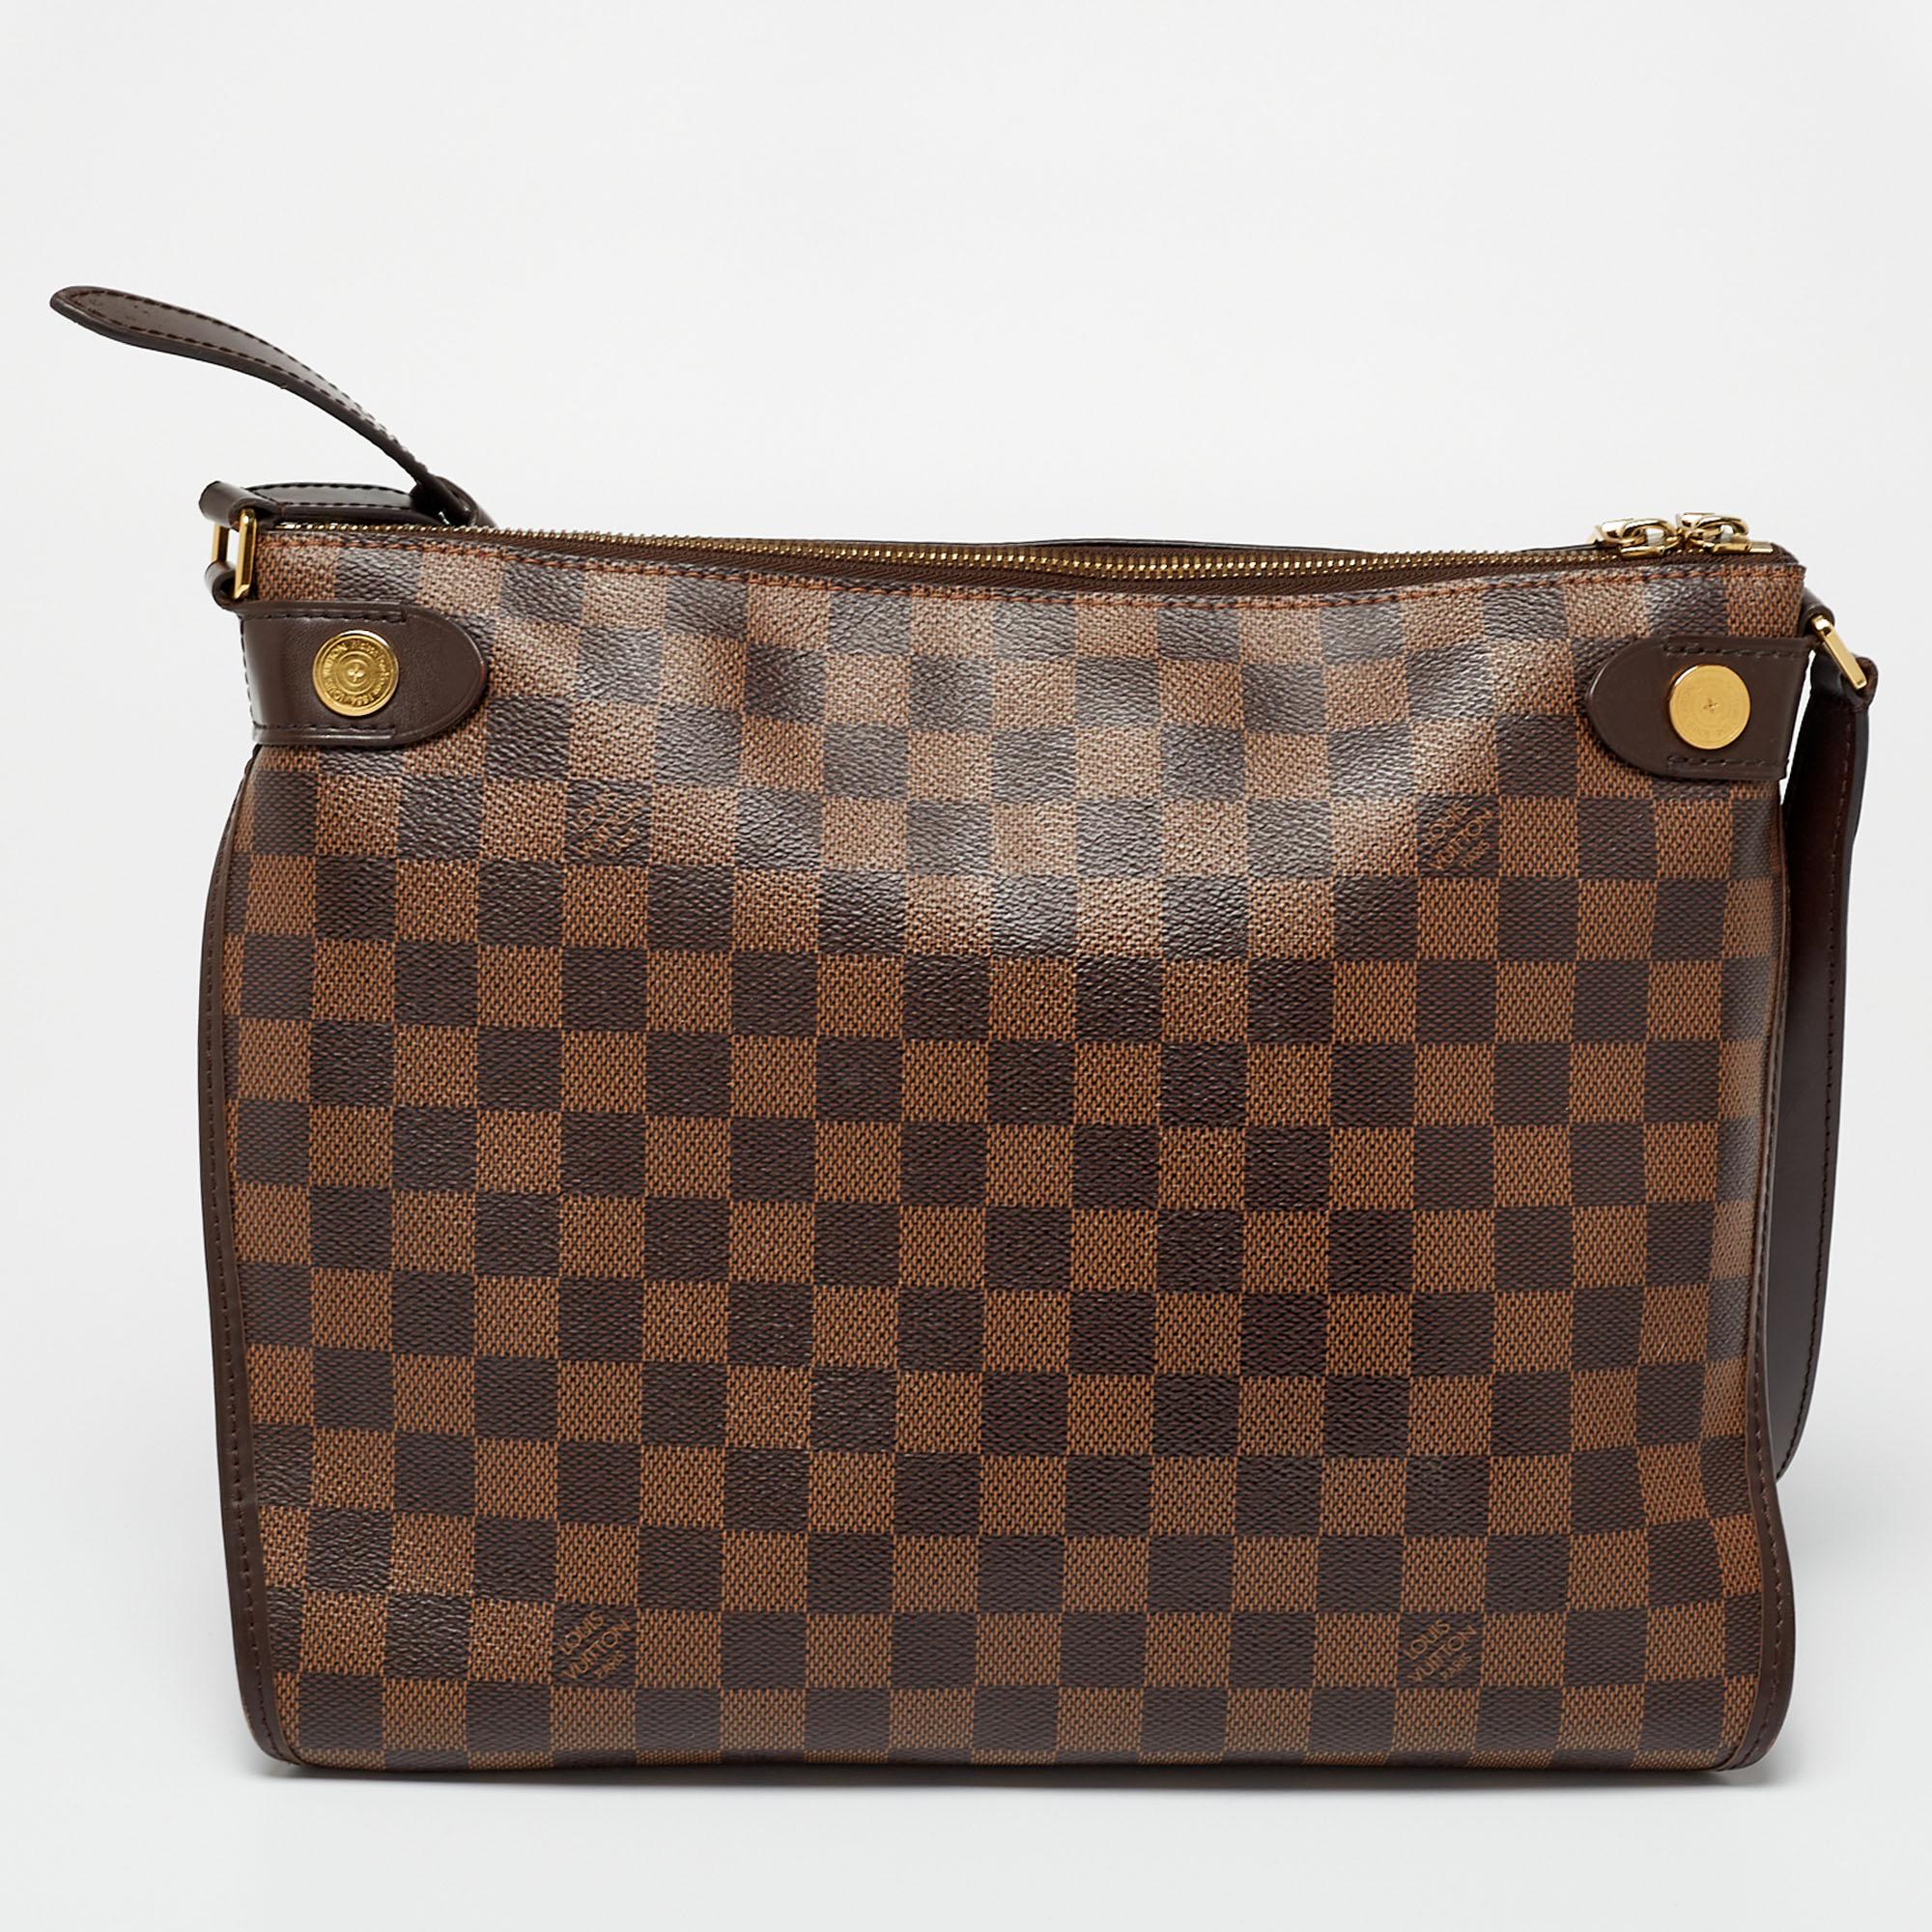 You're sure to fall in love with this bag from Louis Vuitton. Crafted from coated canvas, it flaunts a structured shape and gold-tone details. It has a spacious fabric-lined interior and is complete with a shoulder strap.

Includes: Original